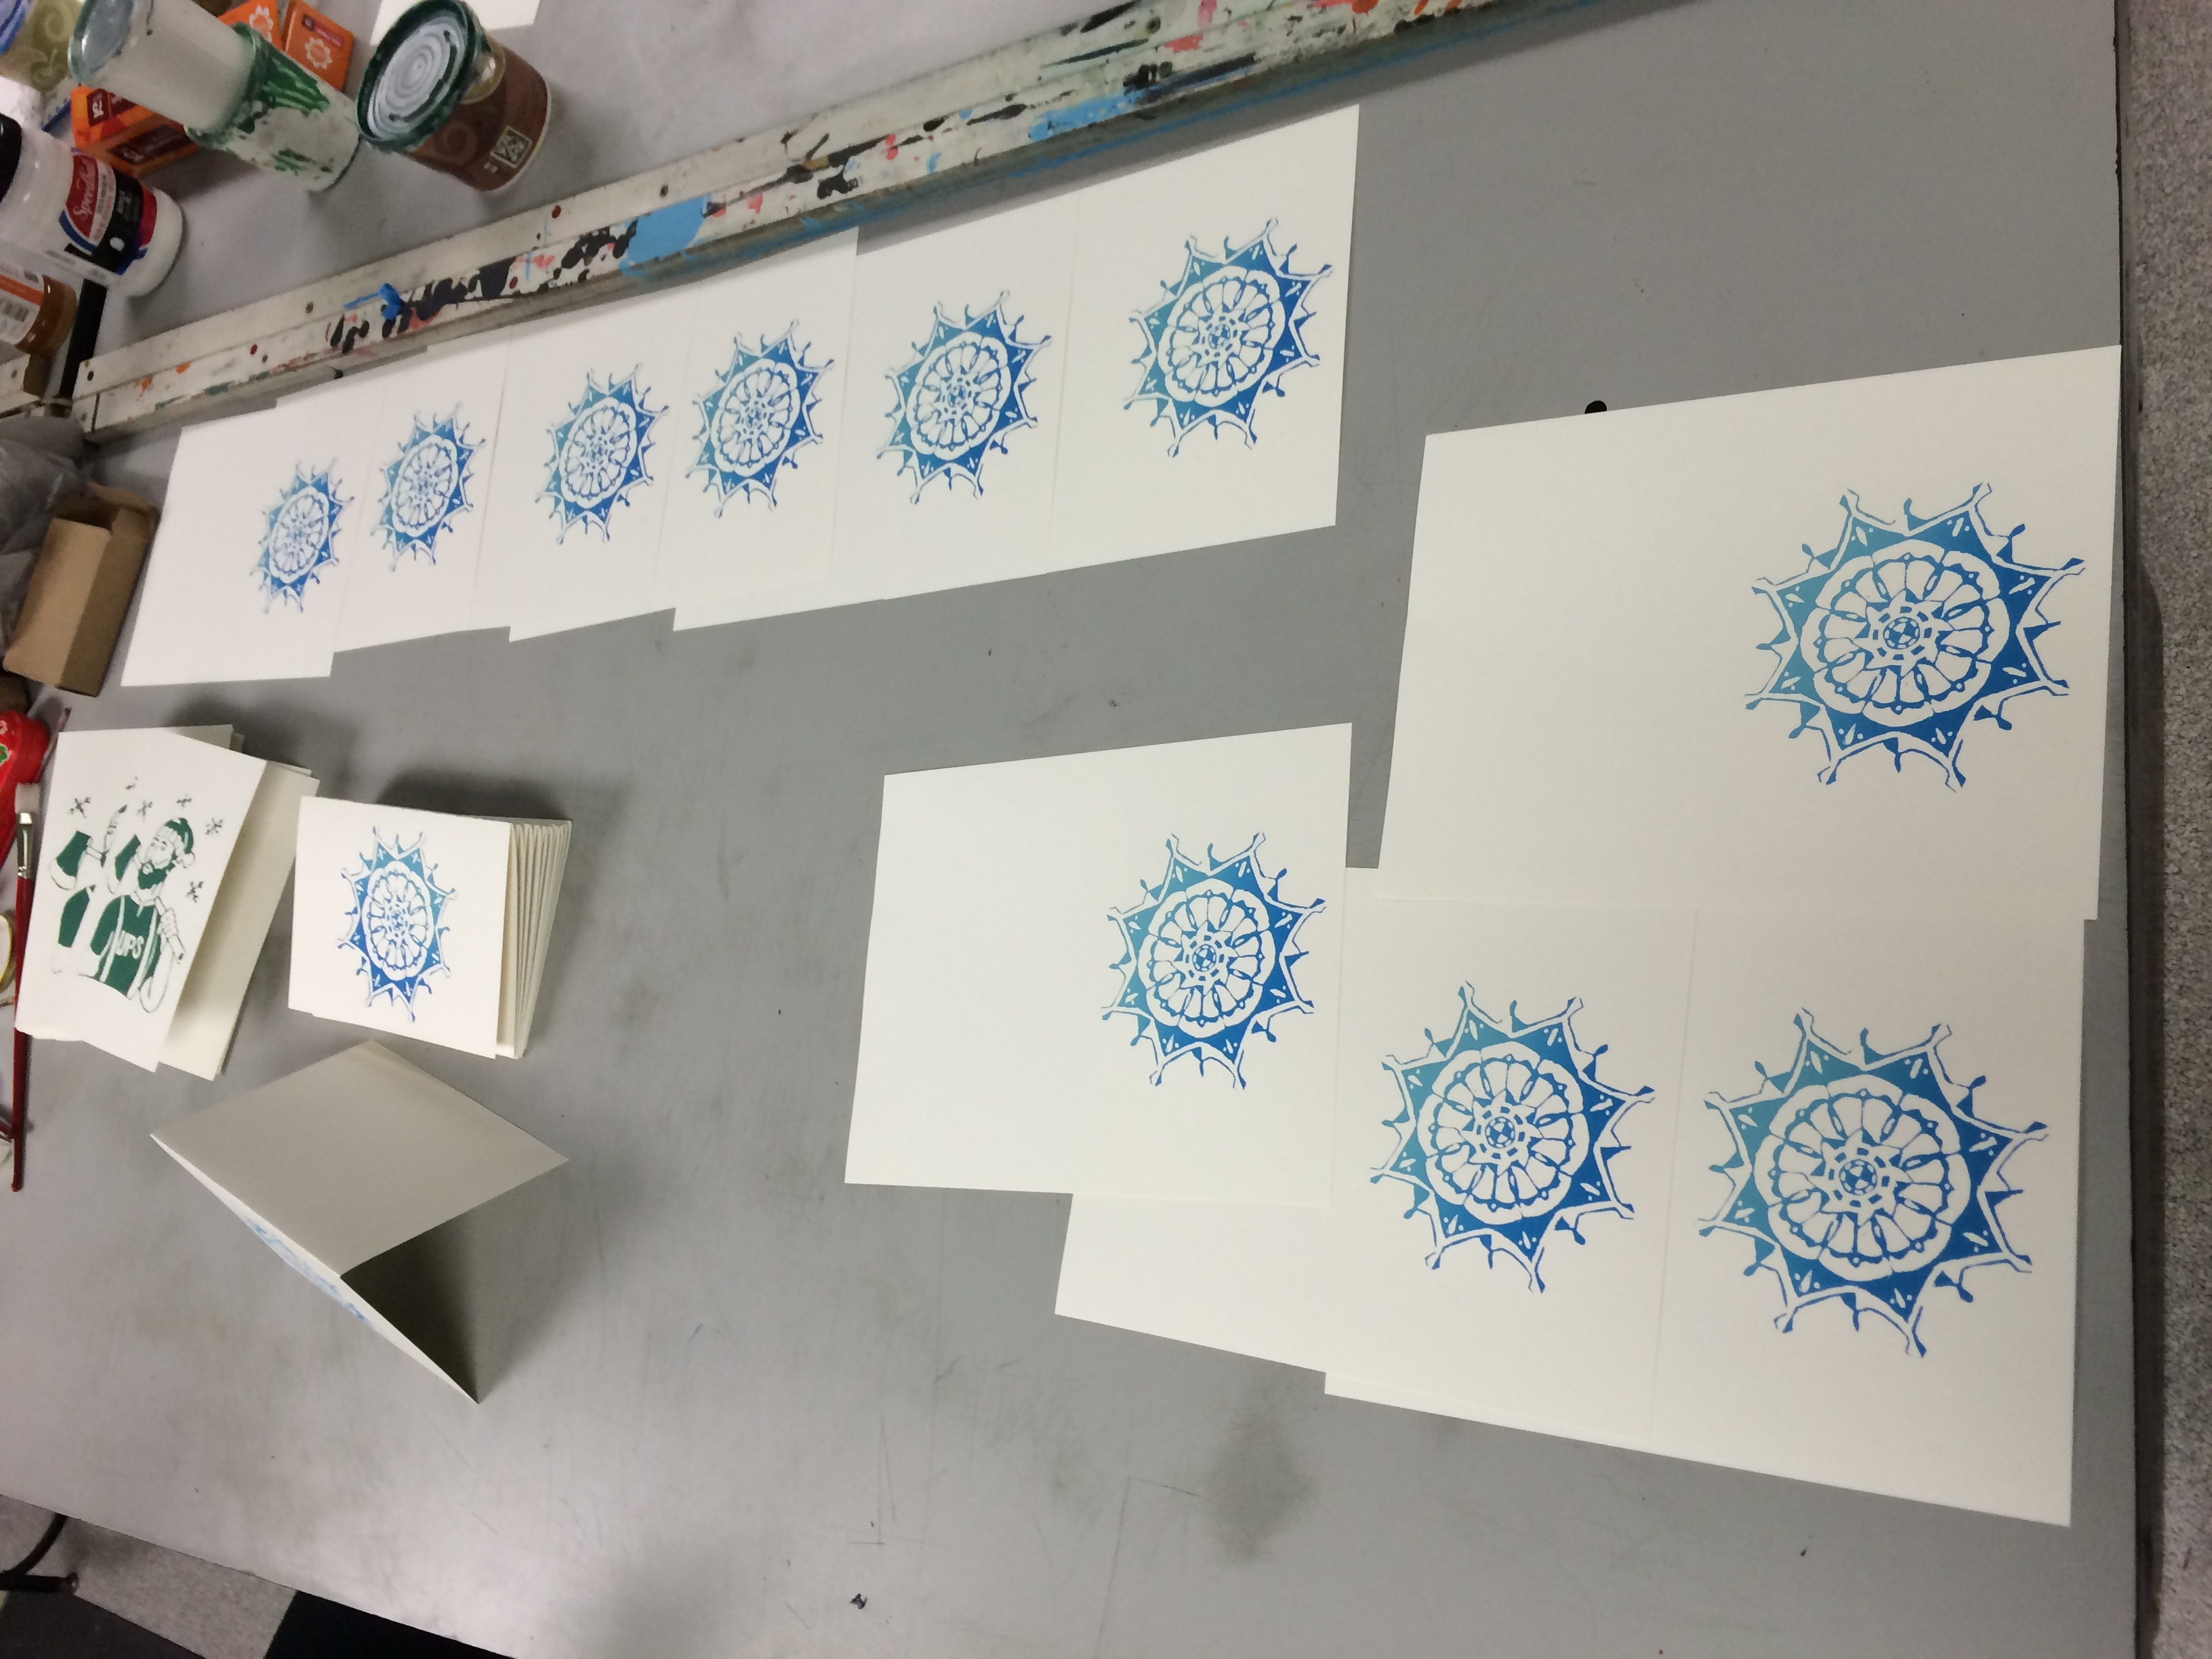 Another one of our designs: this intricate snowflake designed by Rachel!